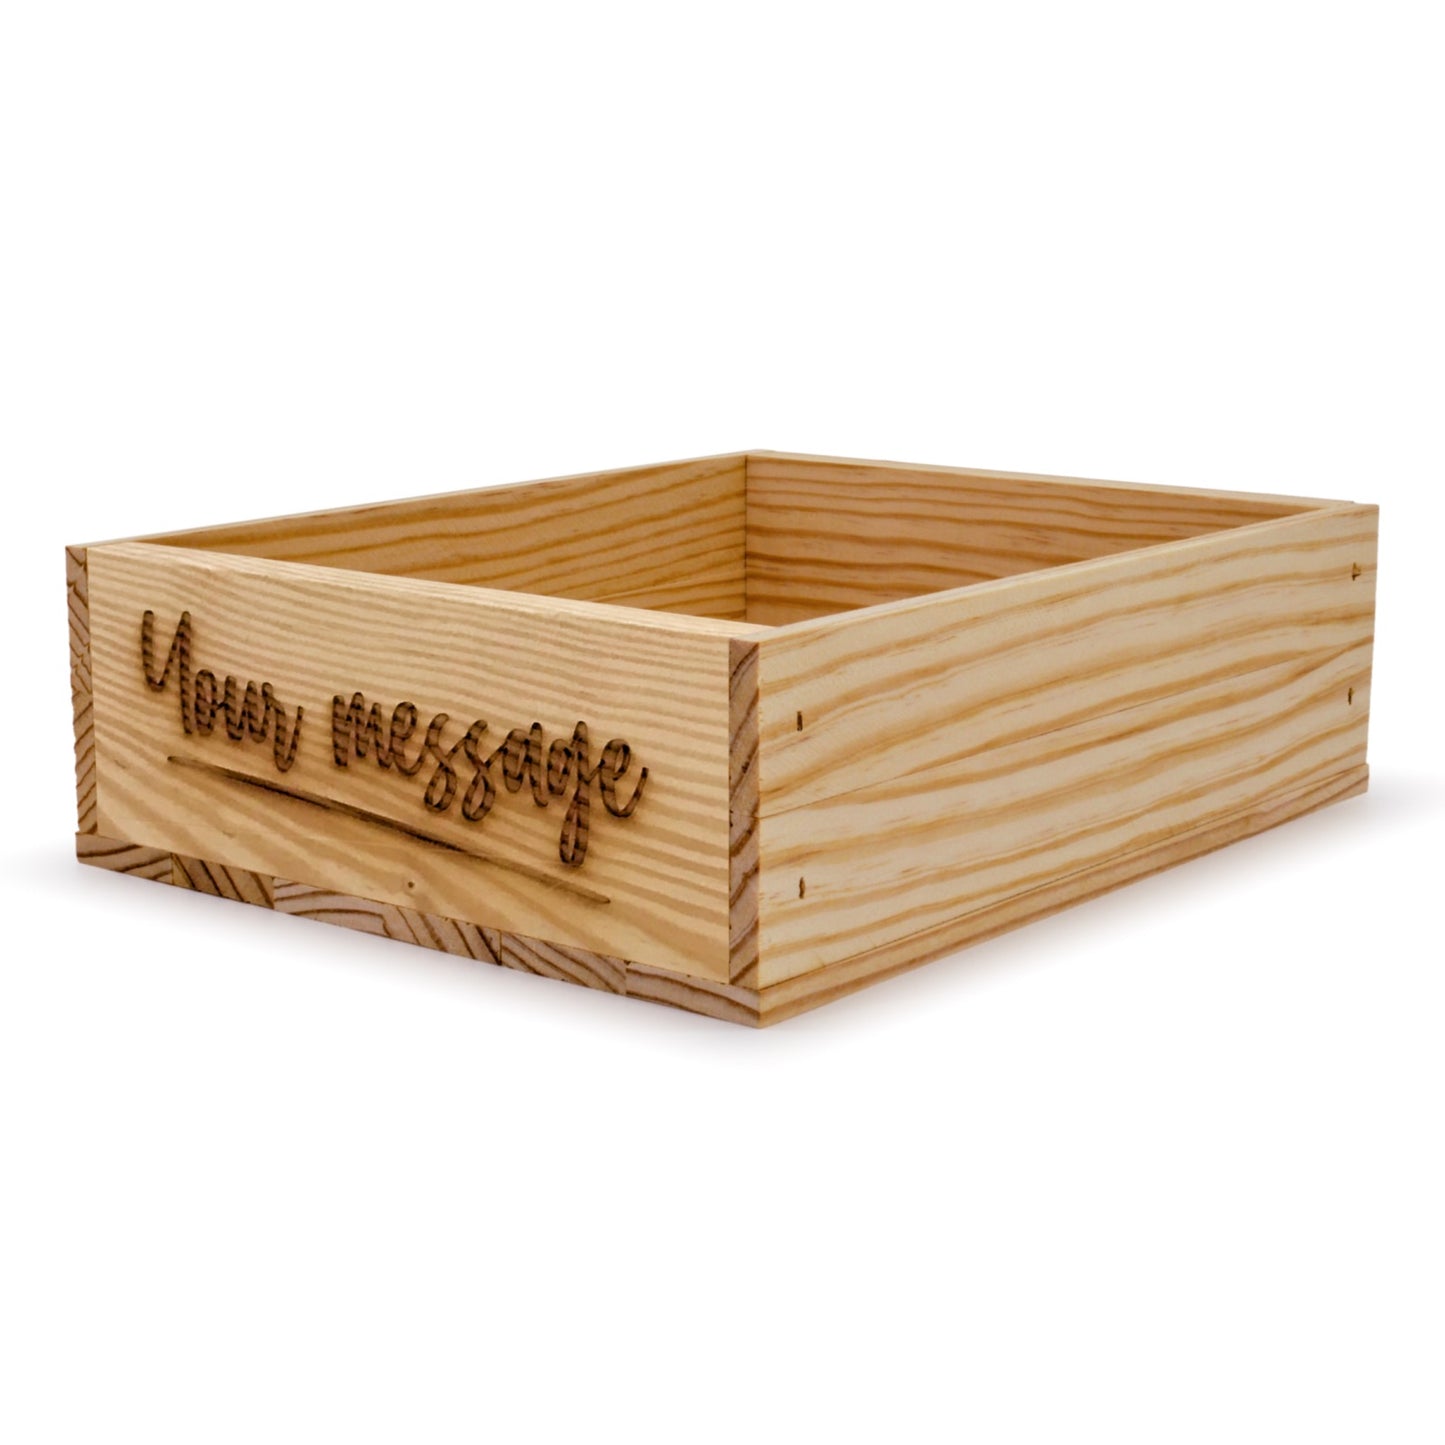 Small wooden crate with custom message 12x9.75x3.5, 6-BX-12-9.75-3.5-ST-NW-NL, 12-BX-12-9.75-3.5-ST-NW-NL, 24-BX-12-9.75-3.5-ST-NW-NL, 48-BX-12-9.75-3.5-ST-NW-NL, 96-BX-12-9.75-3.5-ST-NW-NL